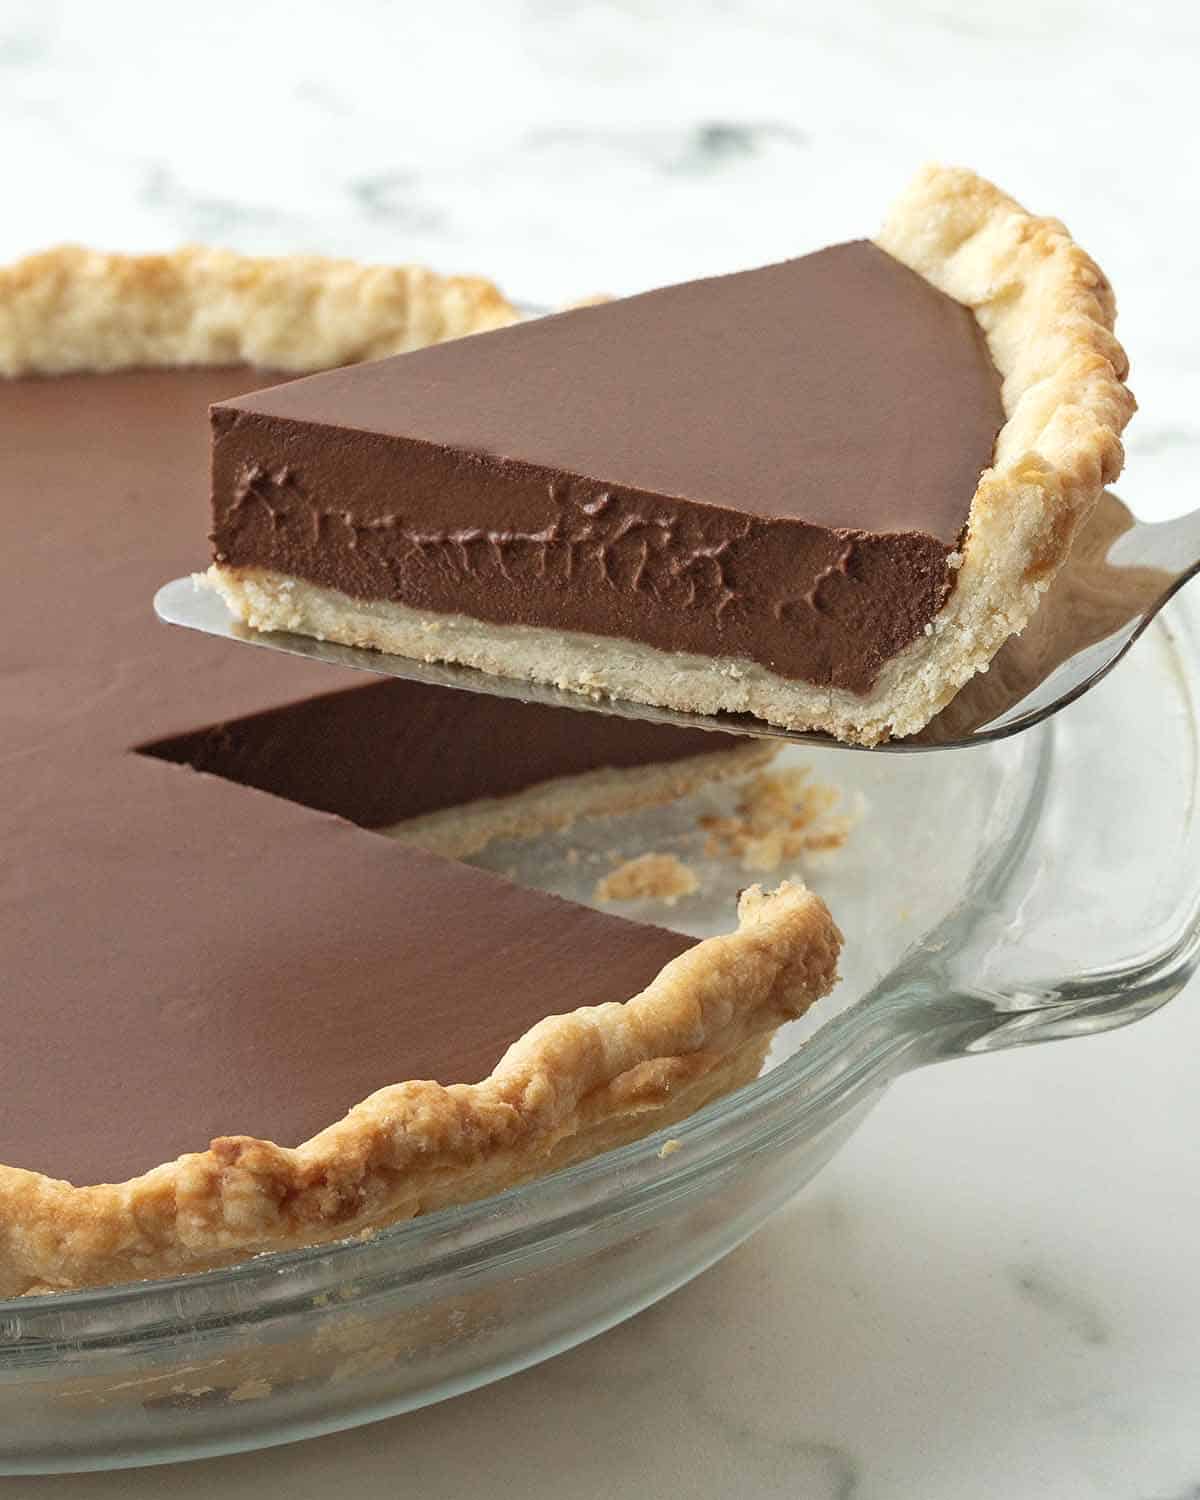 A slice of silky vegan chocolate pie is lifted out of a pie plate and away from the rest of the pie with a pie server.